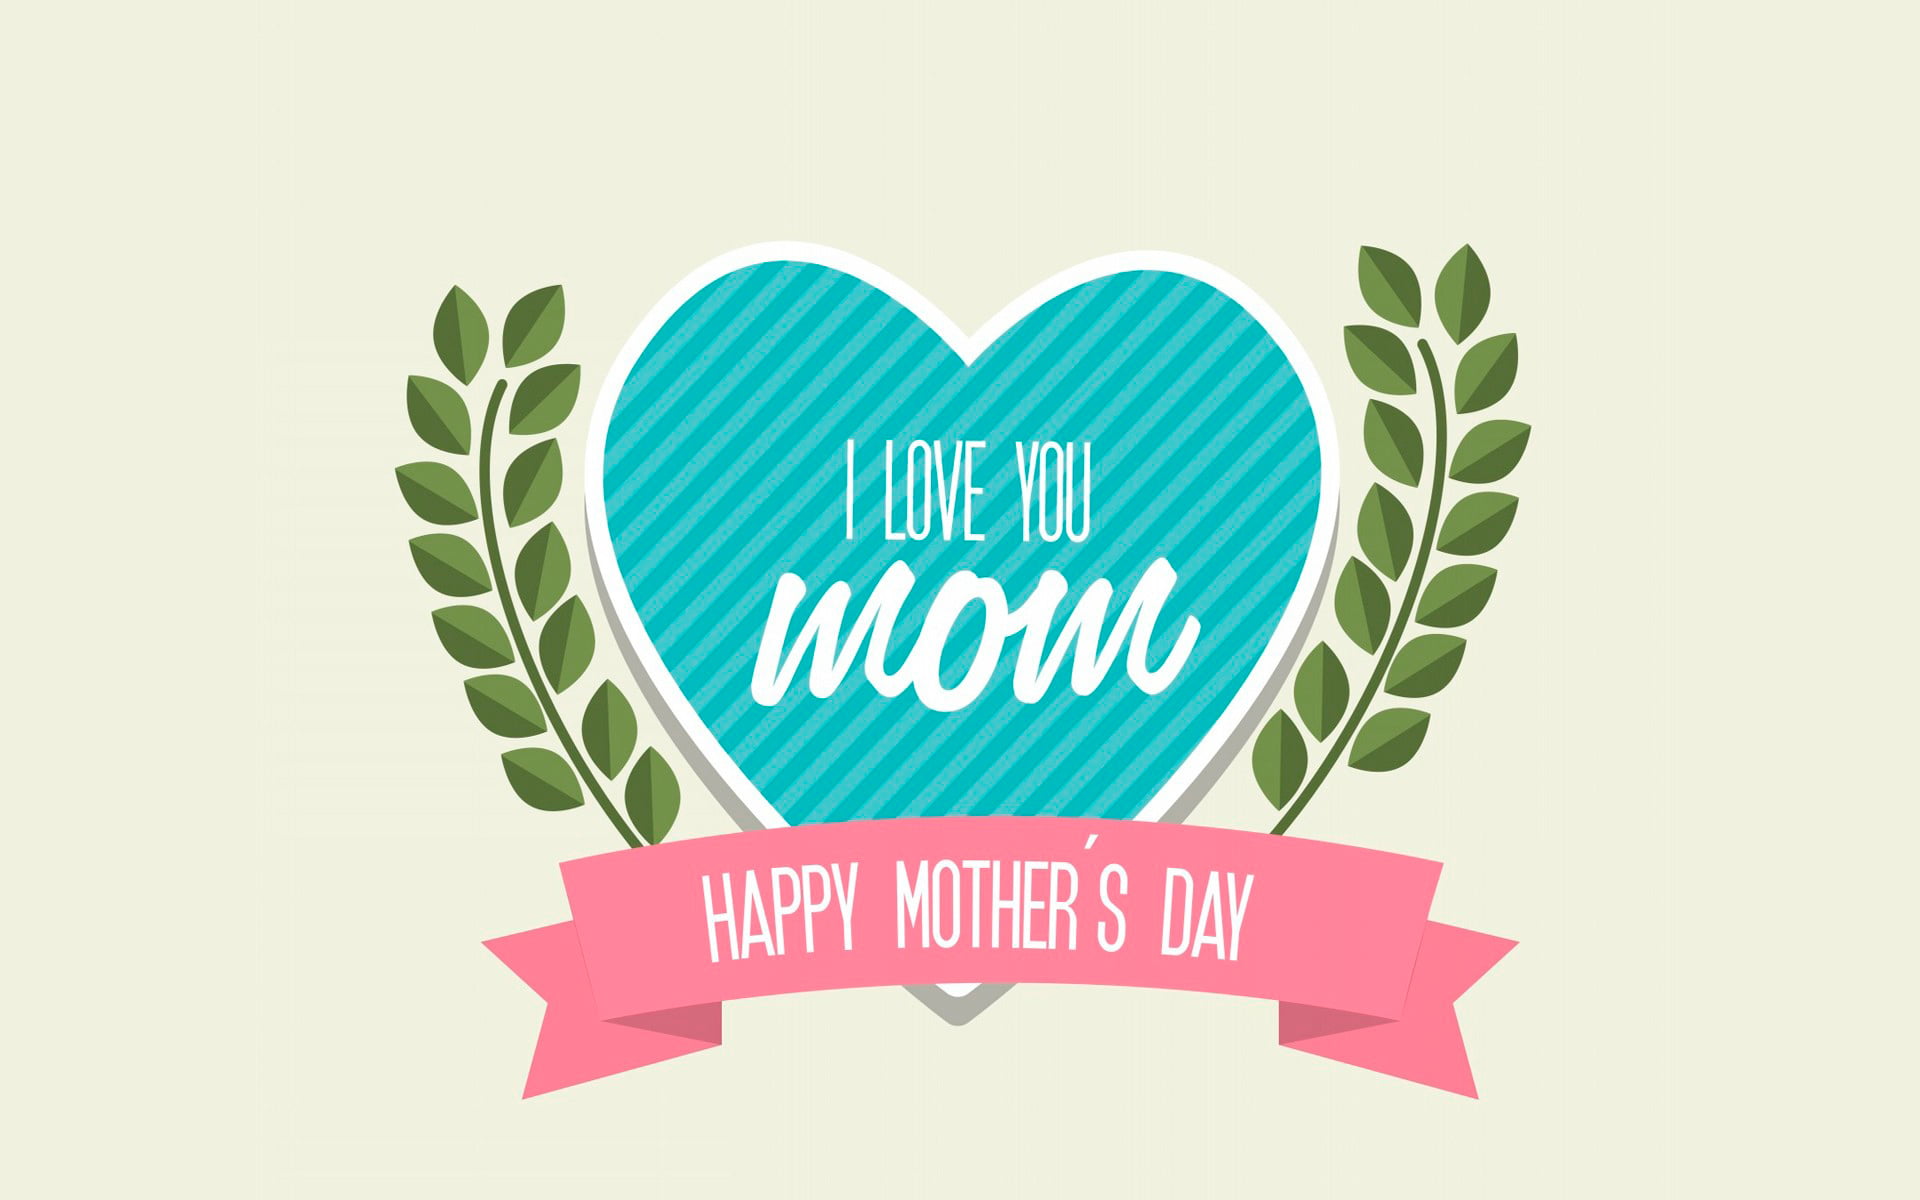 I Love You Mom Happy Mother's D, blue, green, and white heart illustration